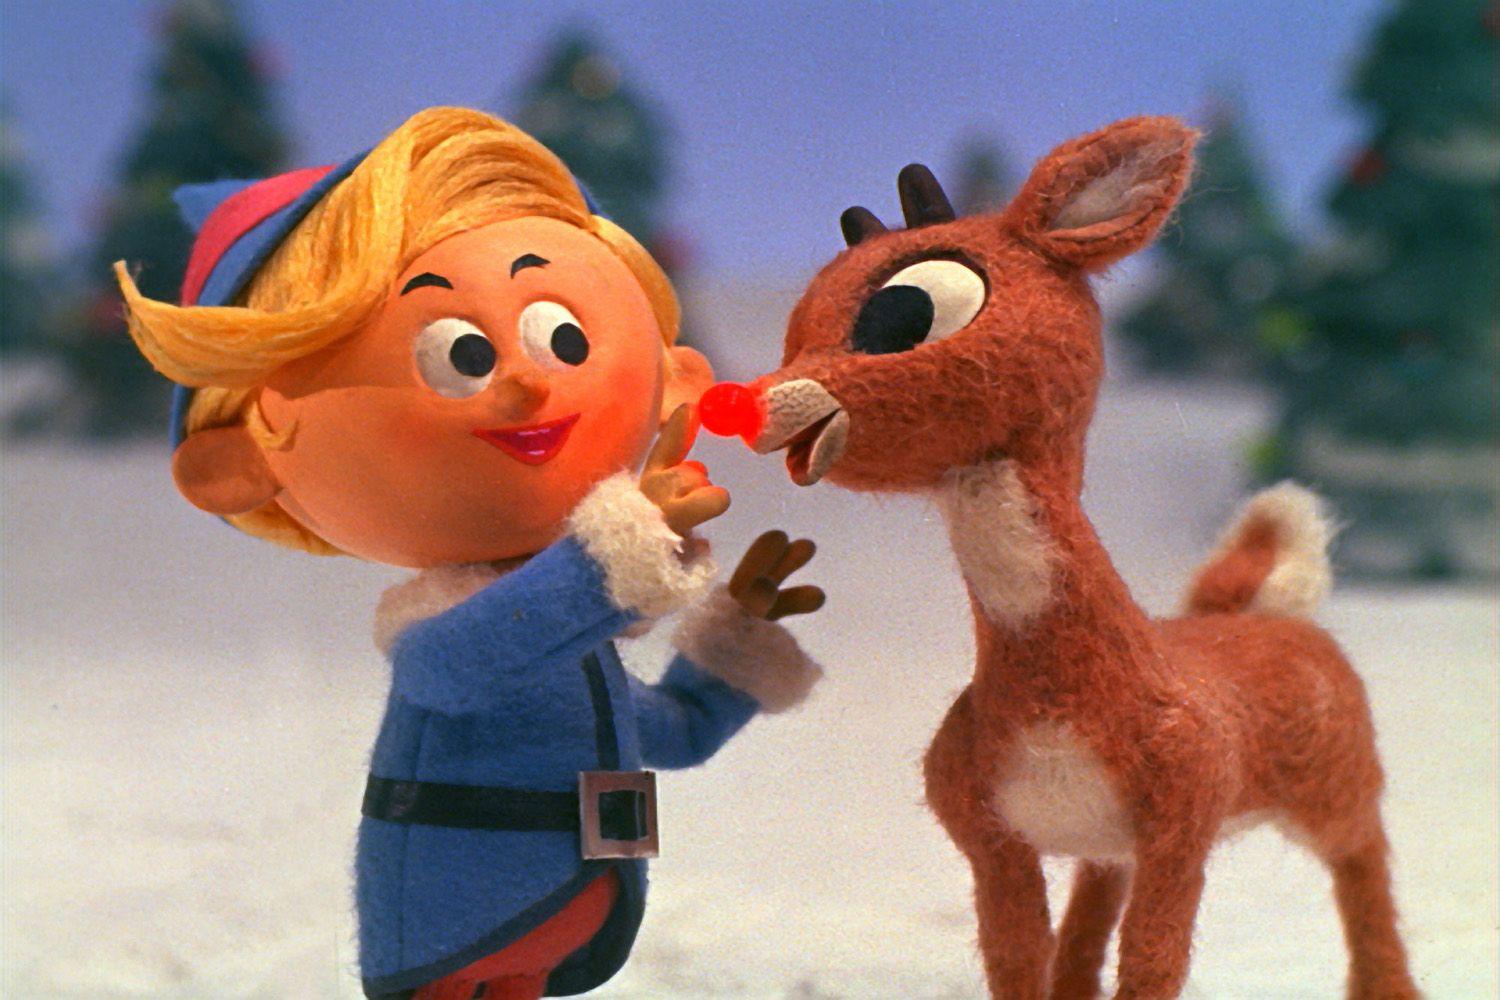 UCR Today: RUDOLPH THE RED NOSED REINDEER